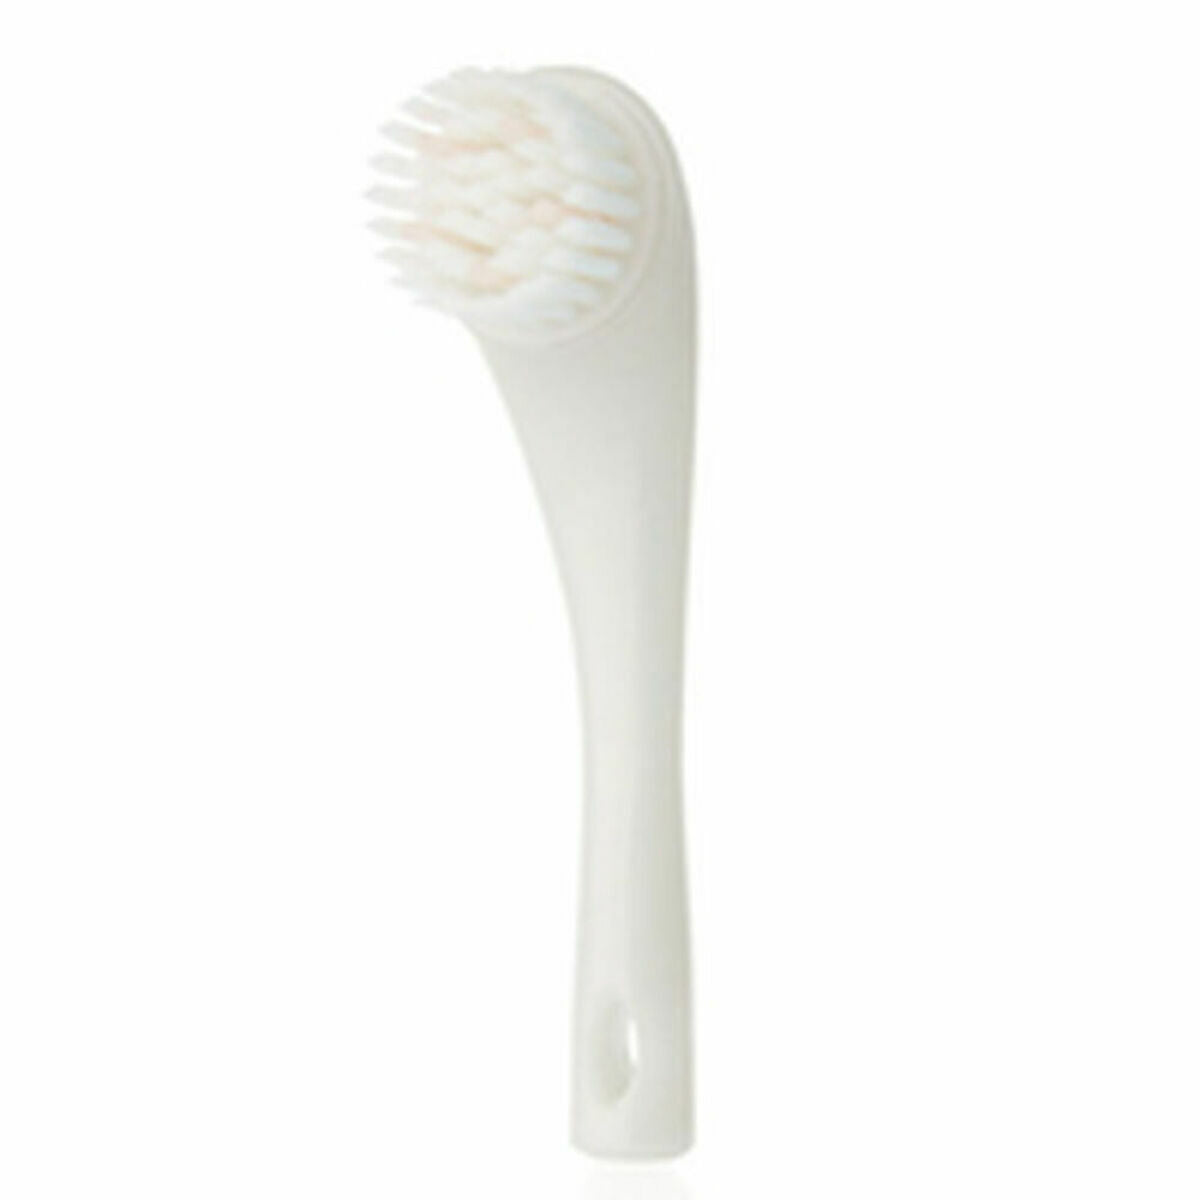 Facial cleansing brush Shiseido The Skin Care Cleansing-0